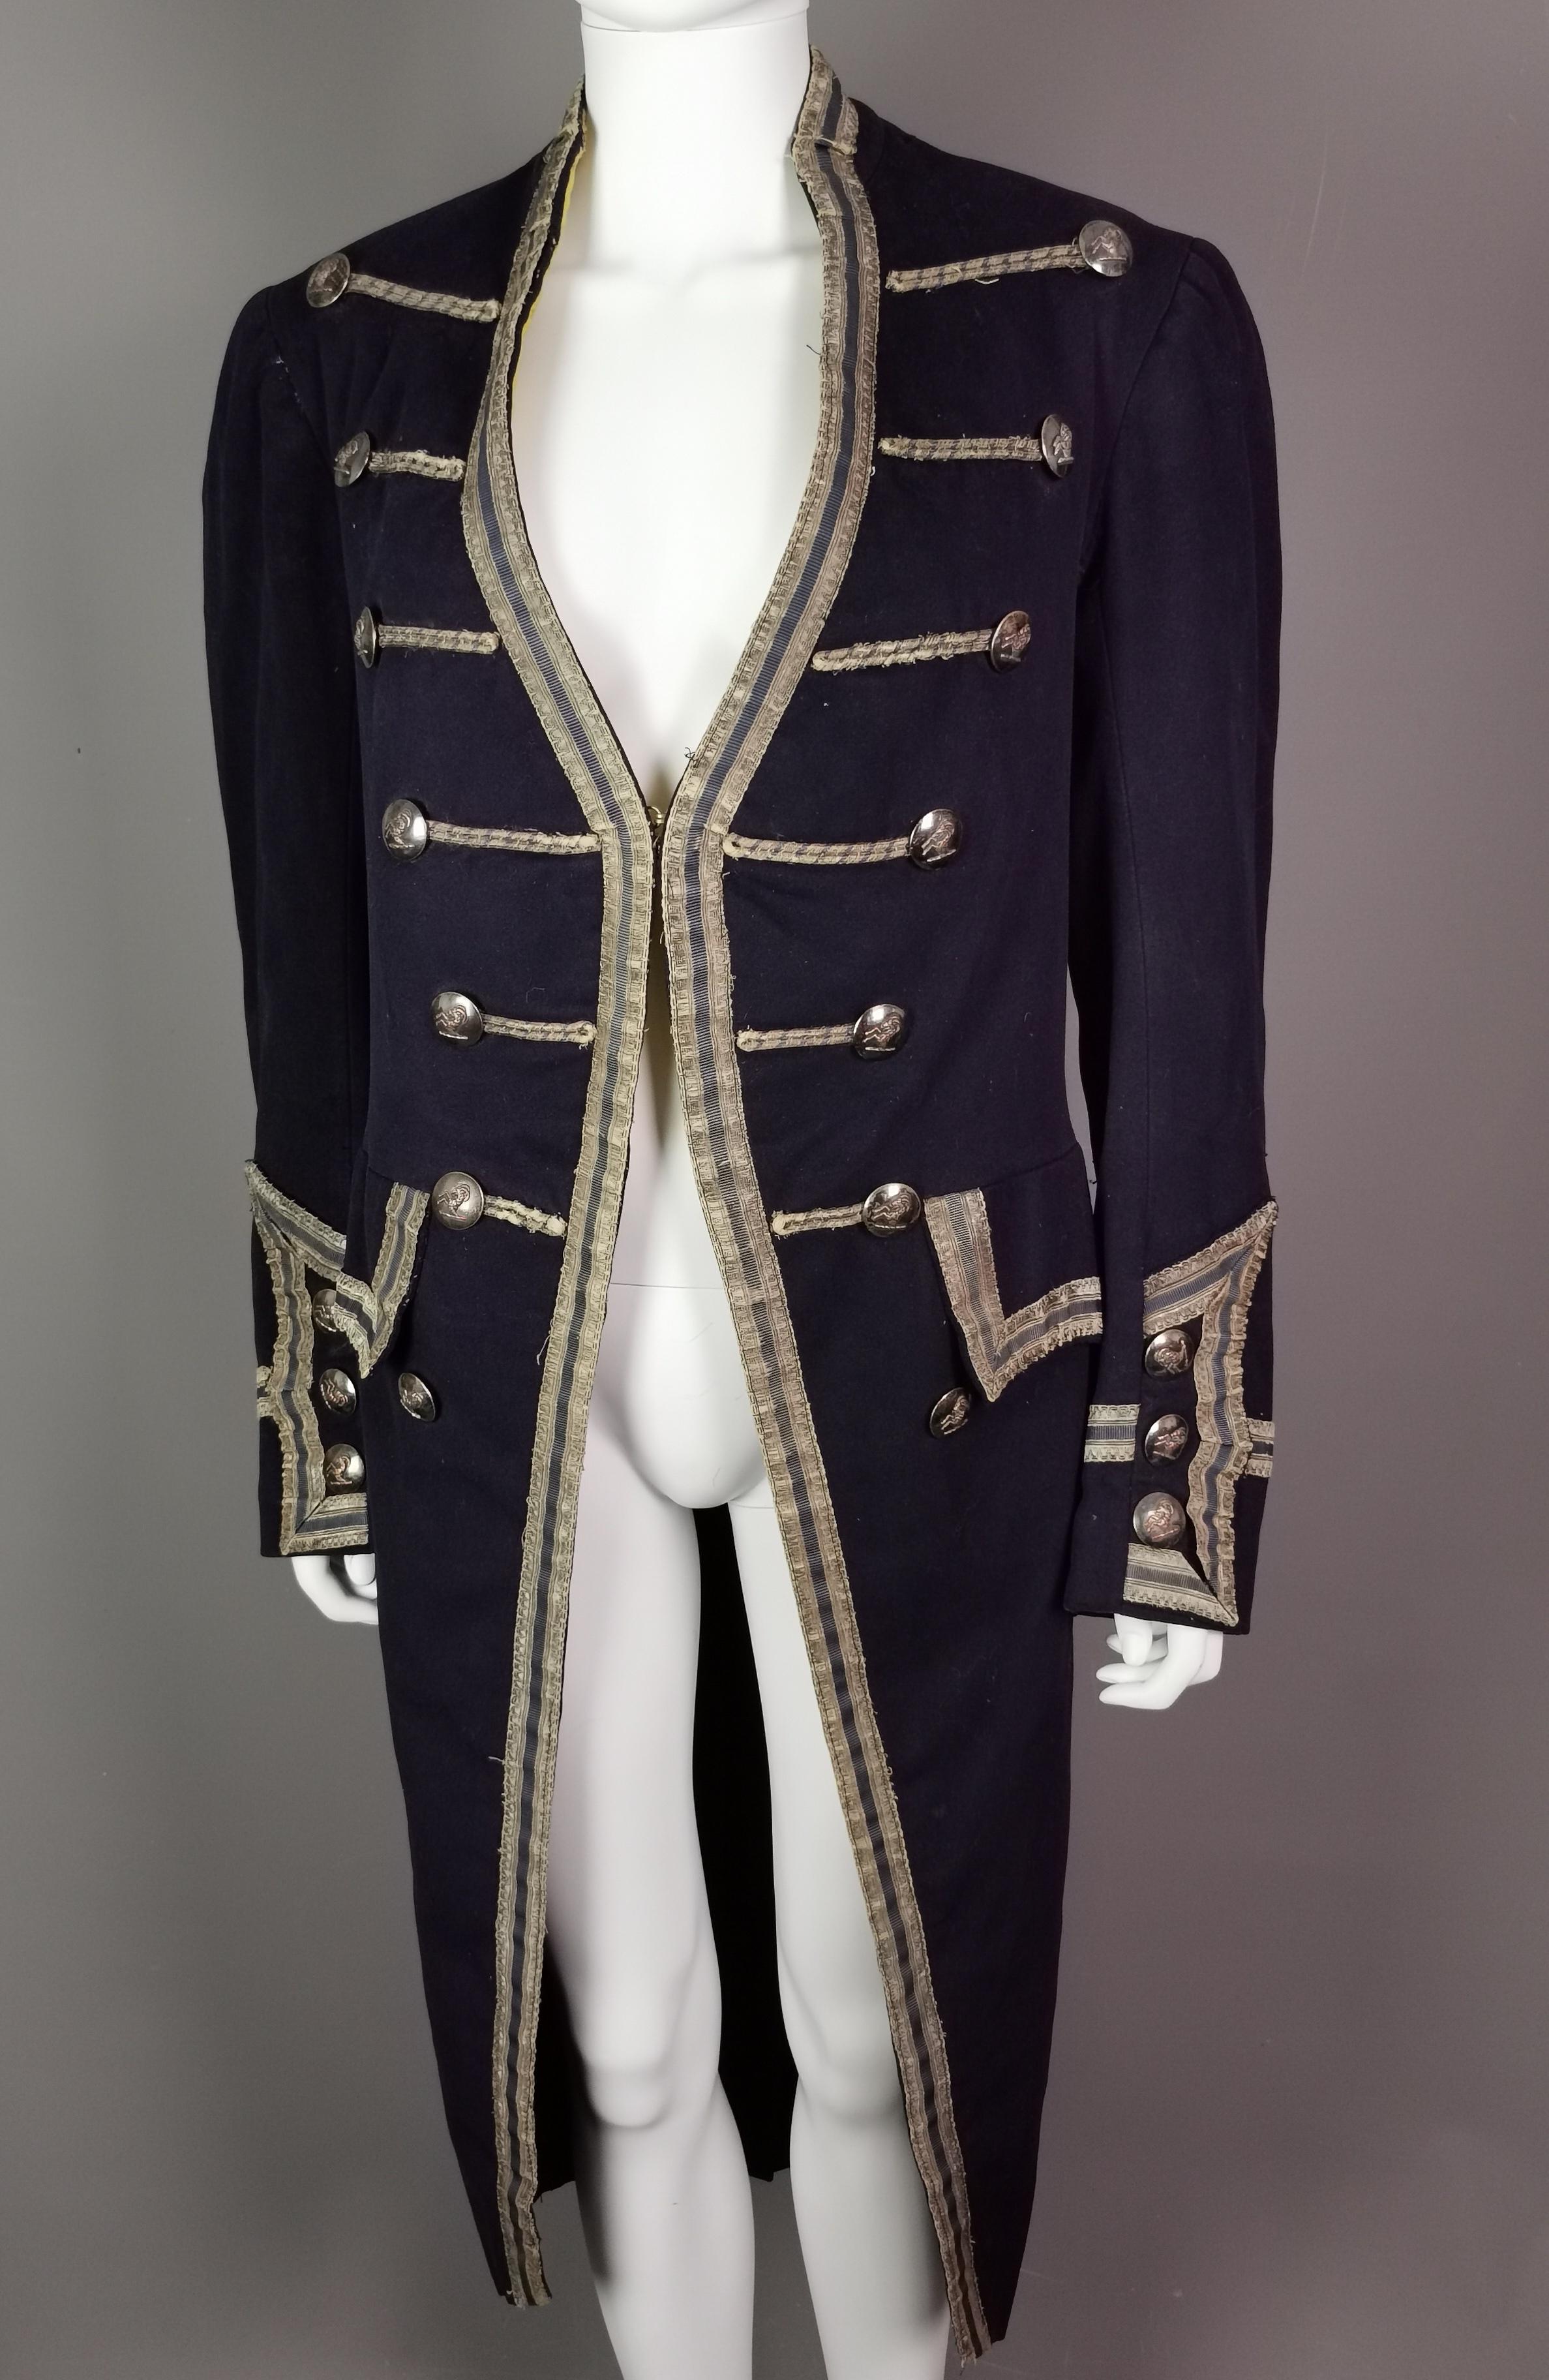 An incredible antique 18th century style military frock coat.

Made for the stage this is a theatrical garment, Edwardian era, made from a heavy navy blue wool with a medium length nap, it is decorated with beige and gold bullion braiding and piping